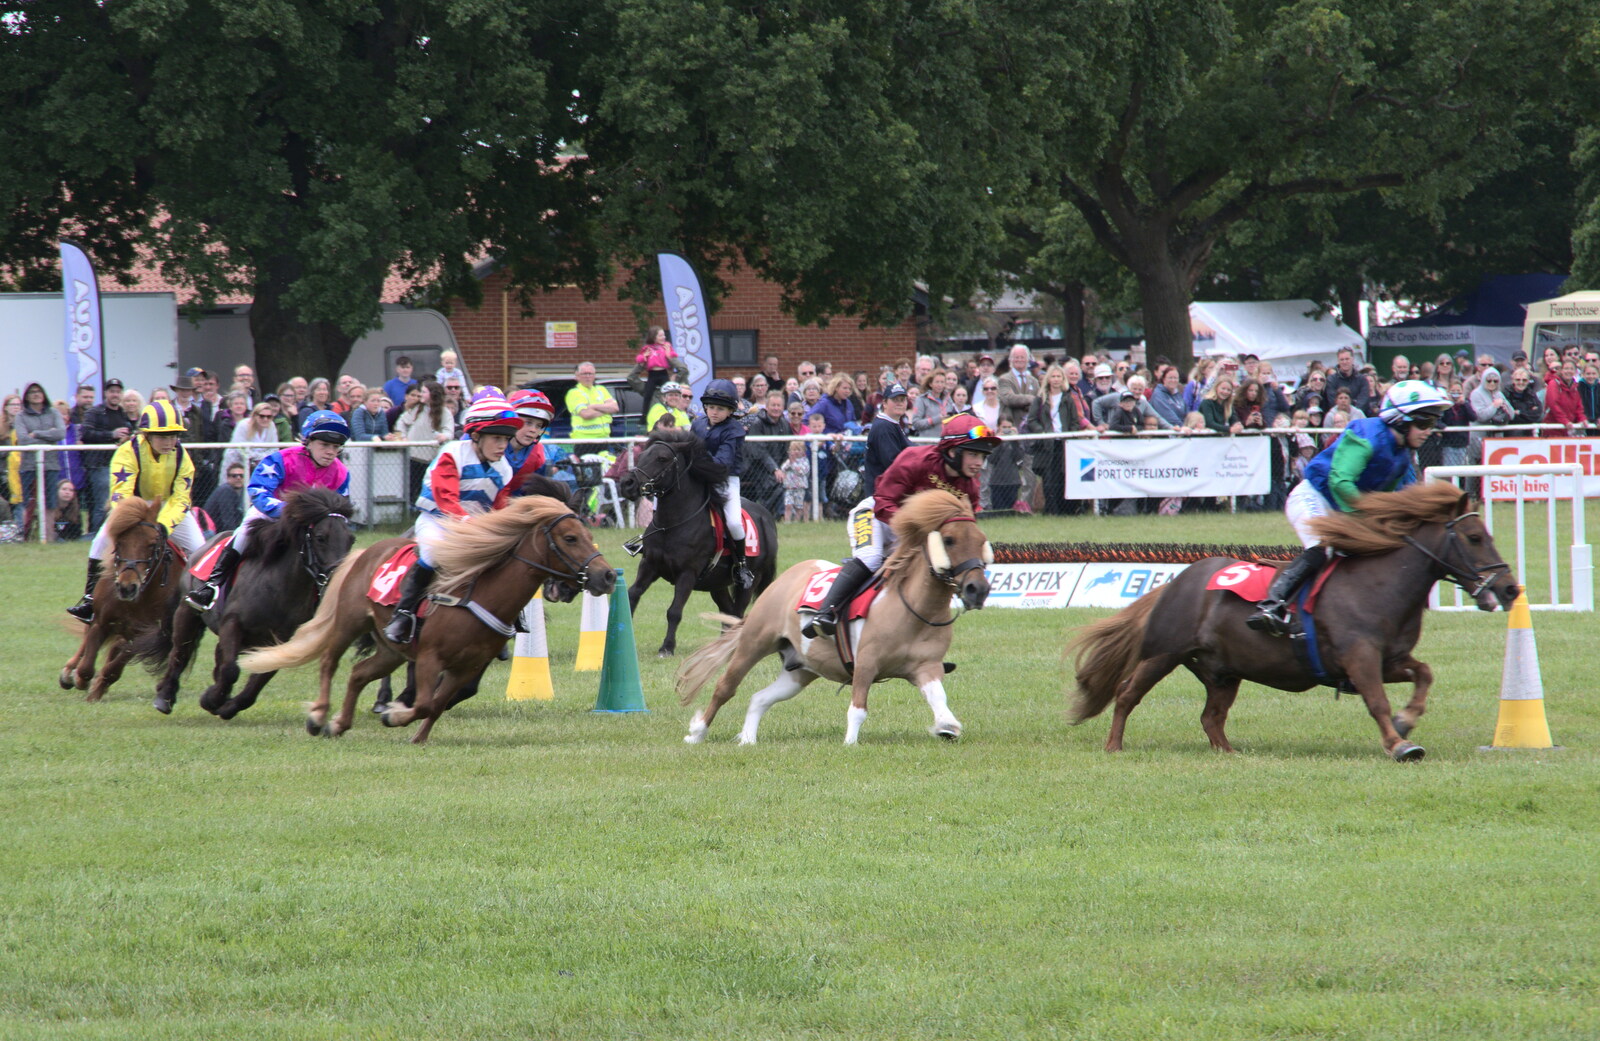 The Suffolk Show, Trinity Park, Ipswich - 1st June 2022: There's an amusing Shetland Pony race